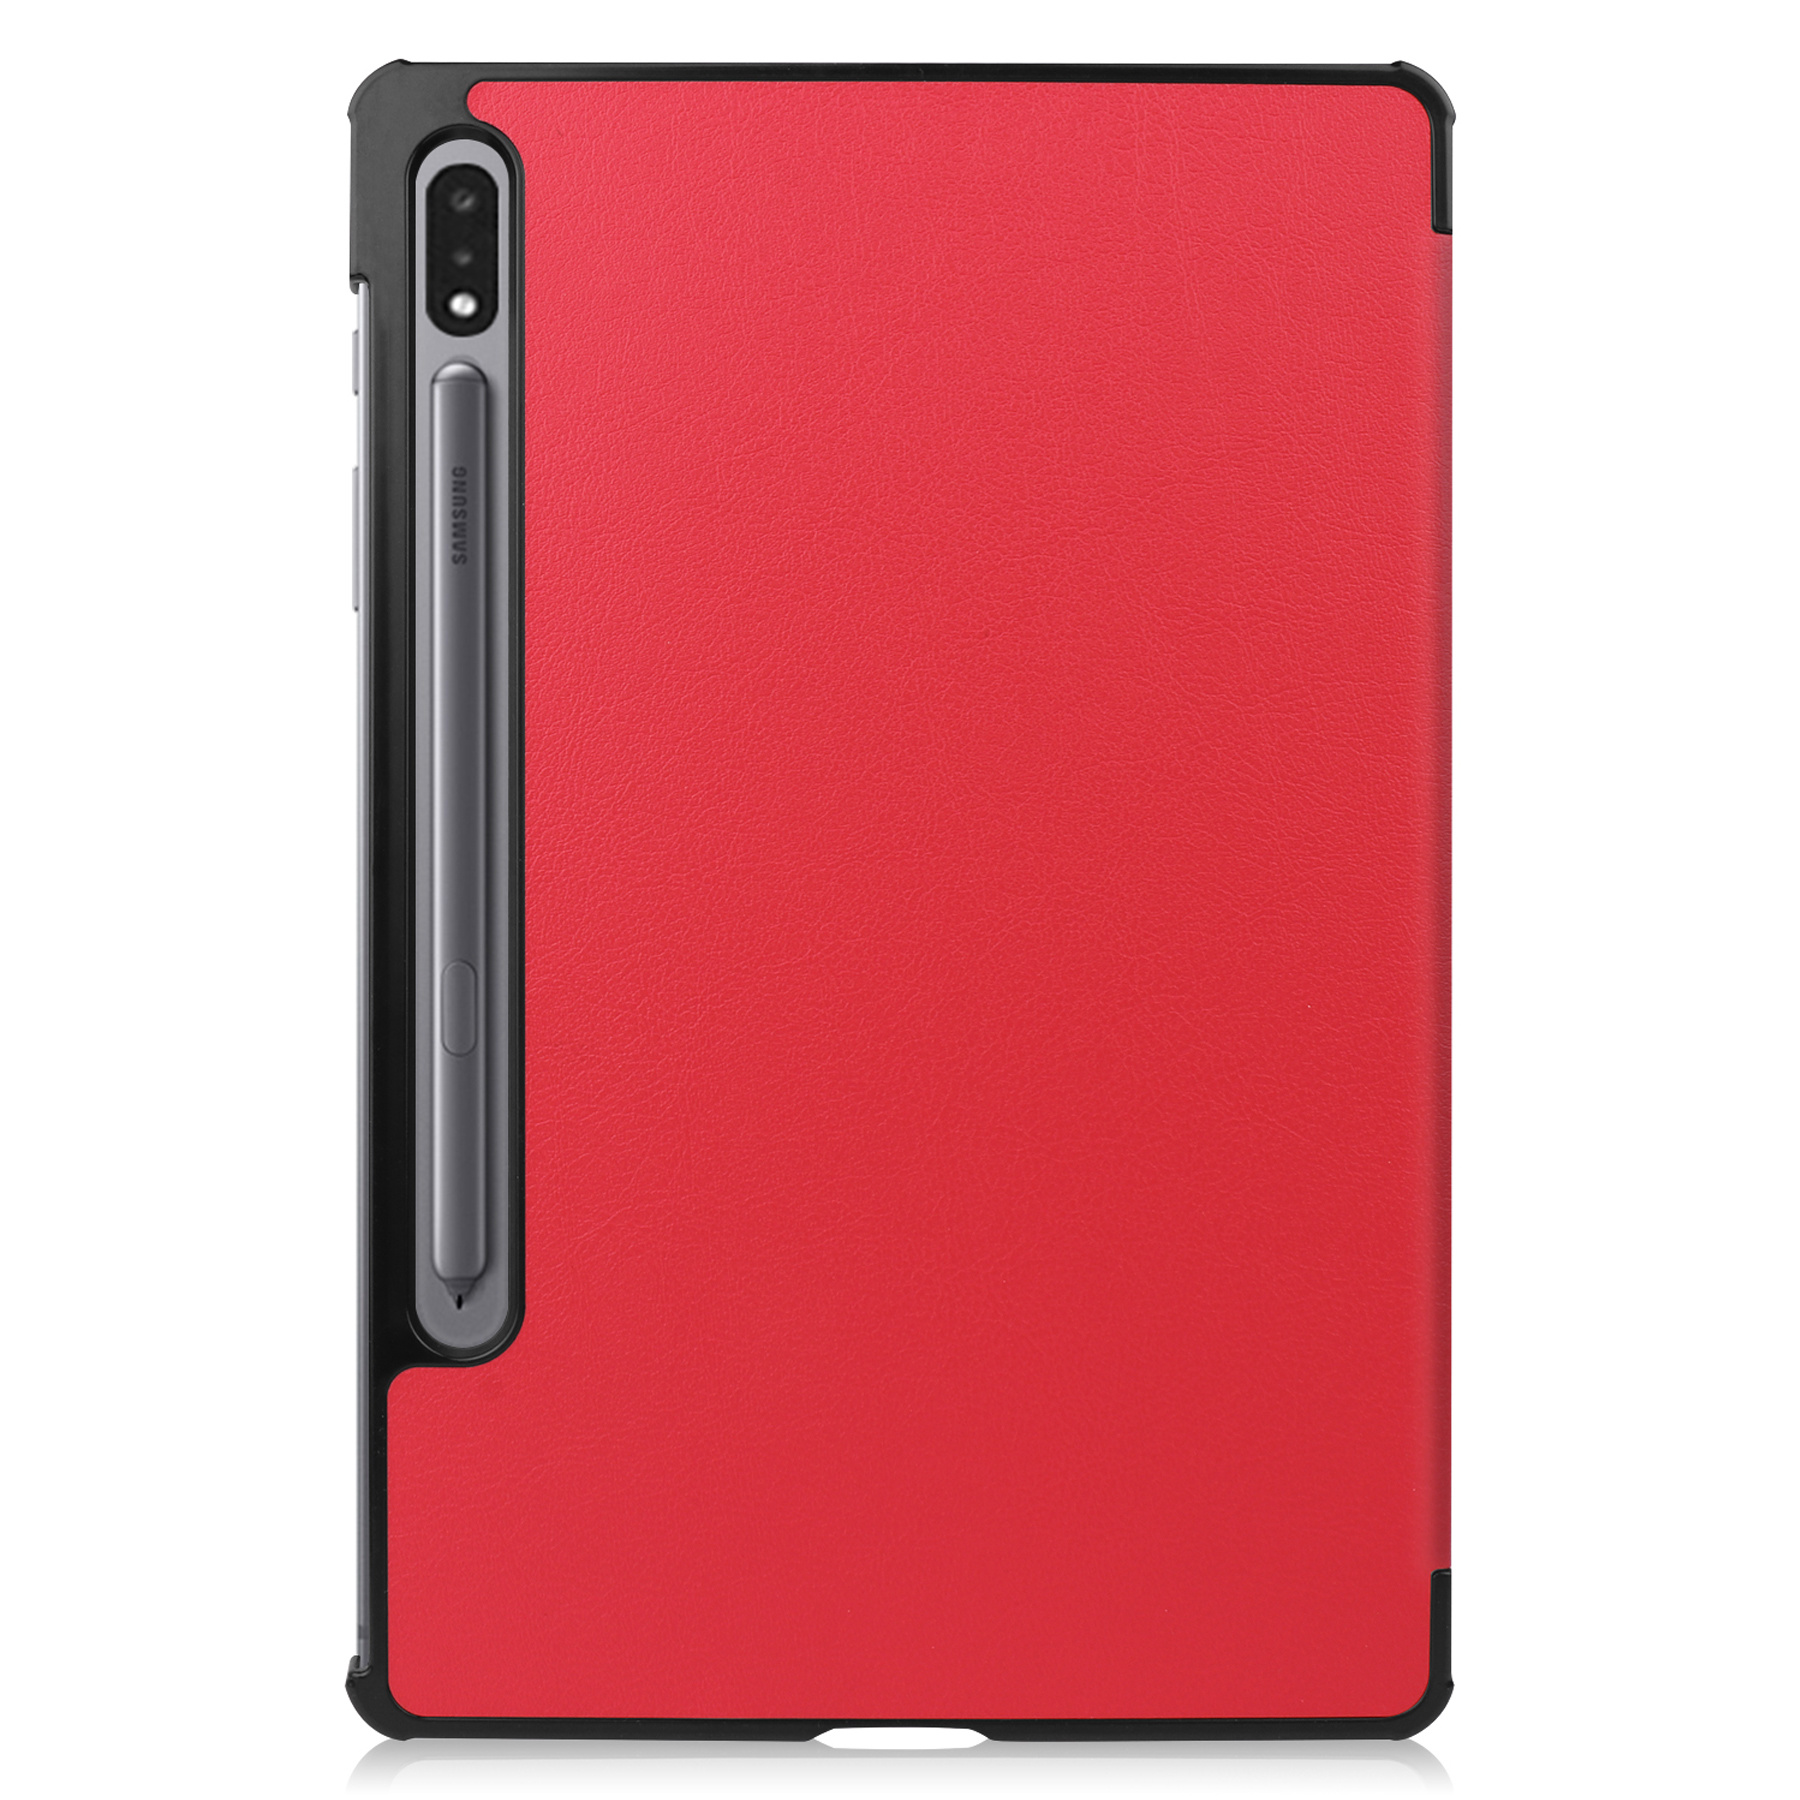 BASEY. Samsung Galaxy Tab S8 Plus Hoes Case Met S Pen Uitsparing - Samsung Galaxy Tab S8 Plus Hoesje Rood - Samsung Tab S8 Plus Book Case Cover